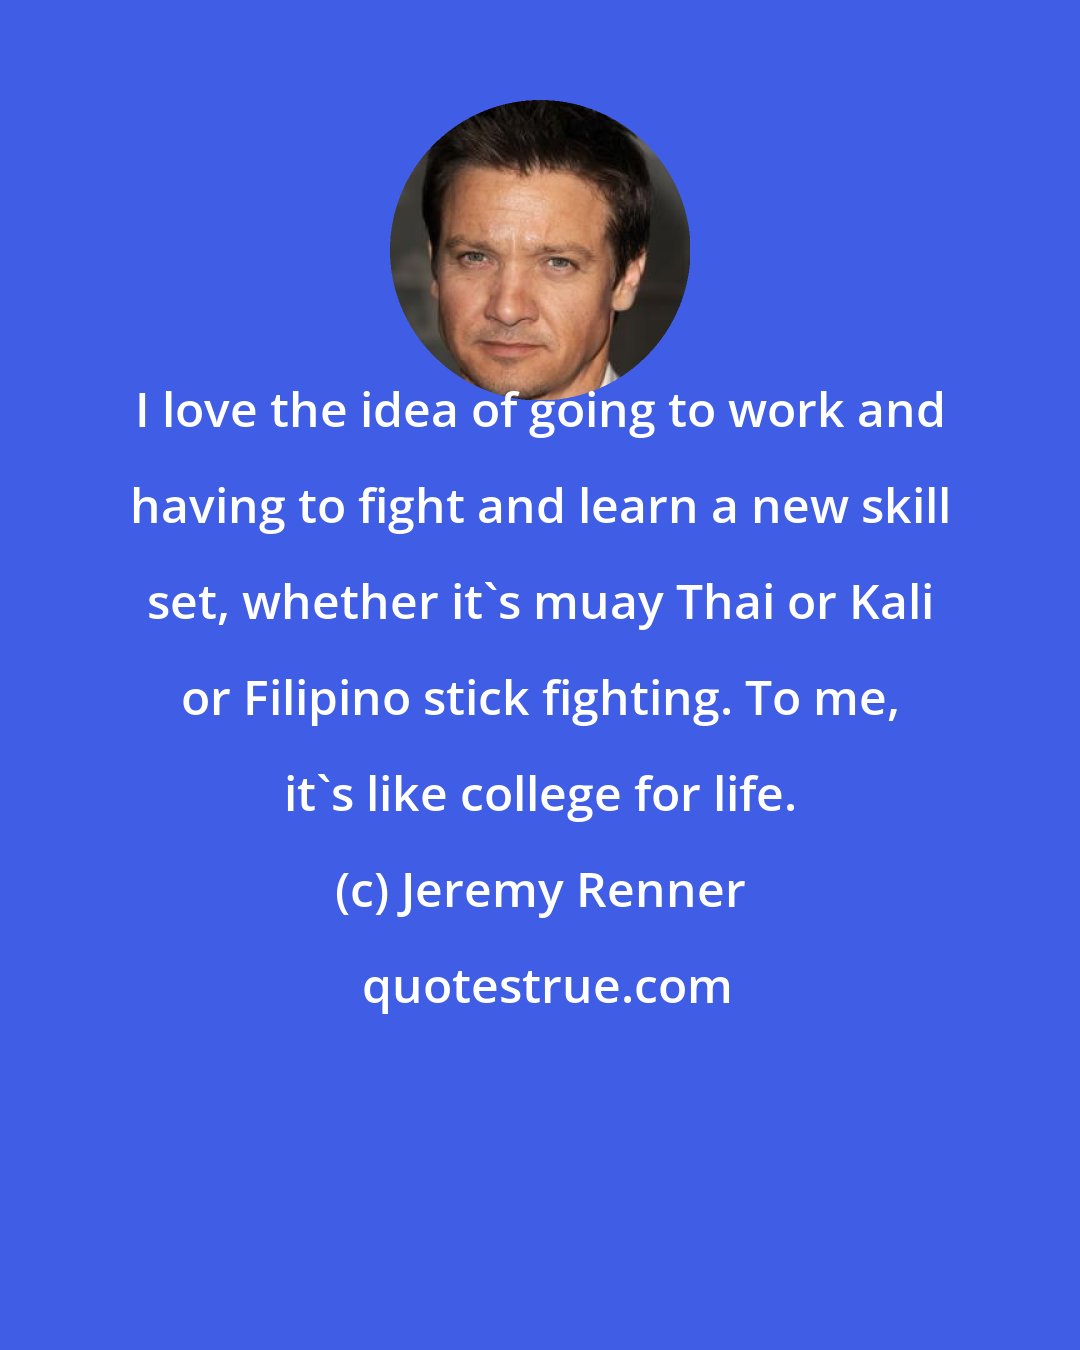 Jeremy Renner: I love the idea of going to work and having to fight and learn a new skill set, whether it's muay Thai or Kali or Filipino stick fighting. To me, it's like college for life.